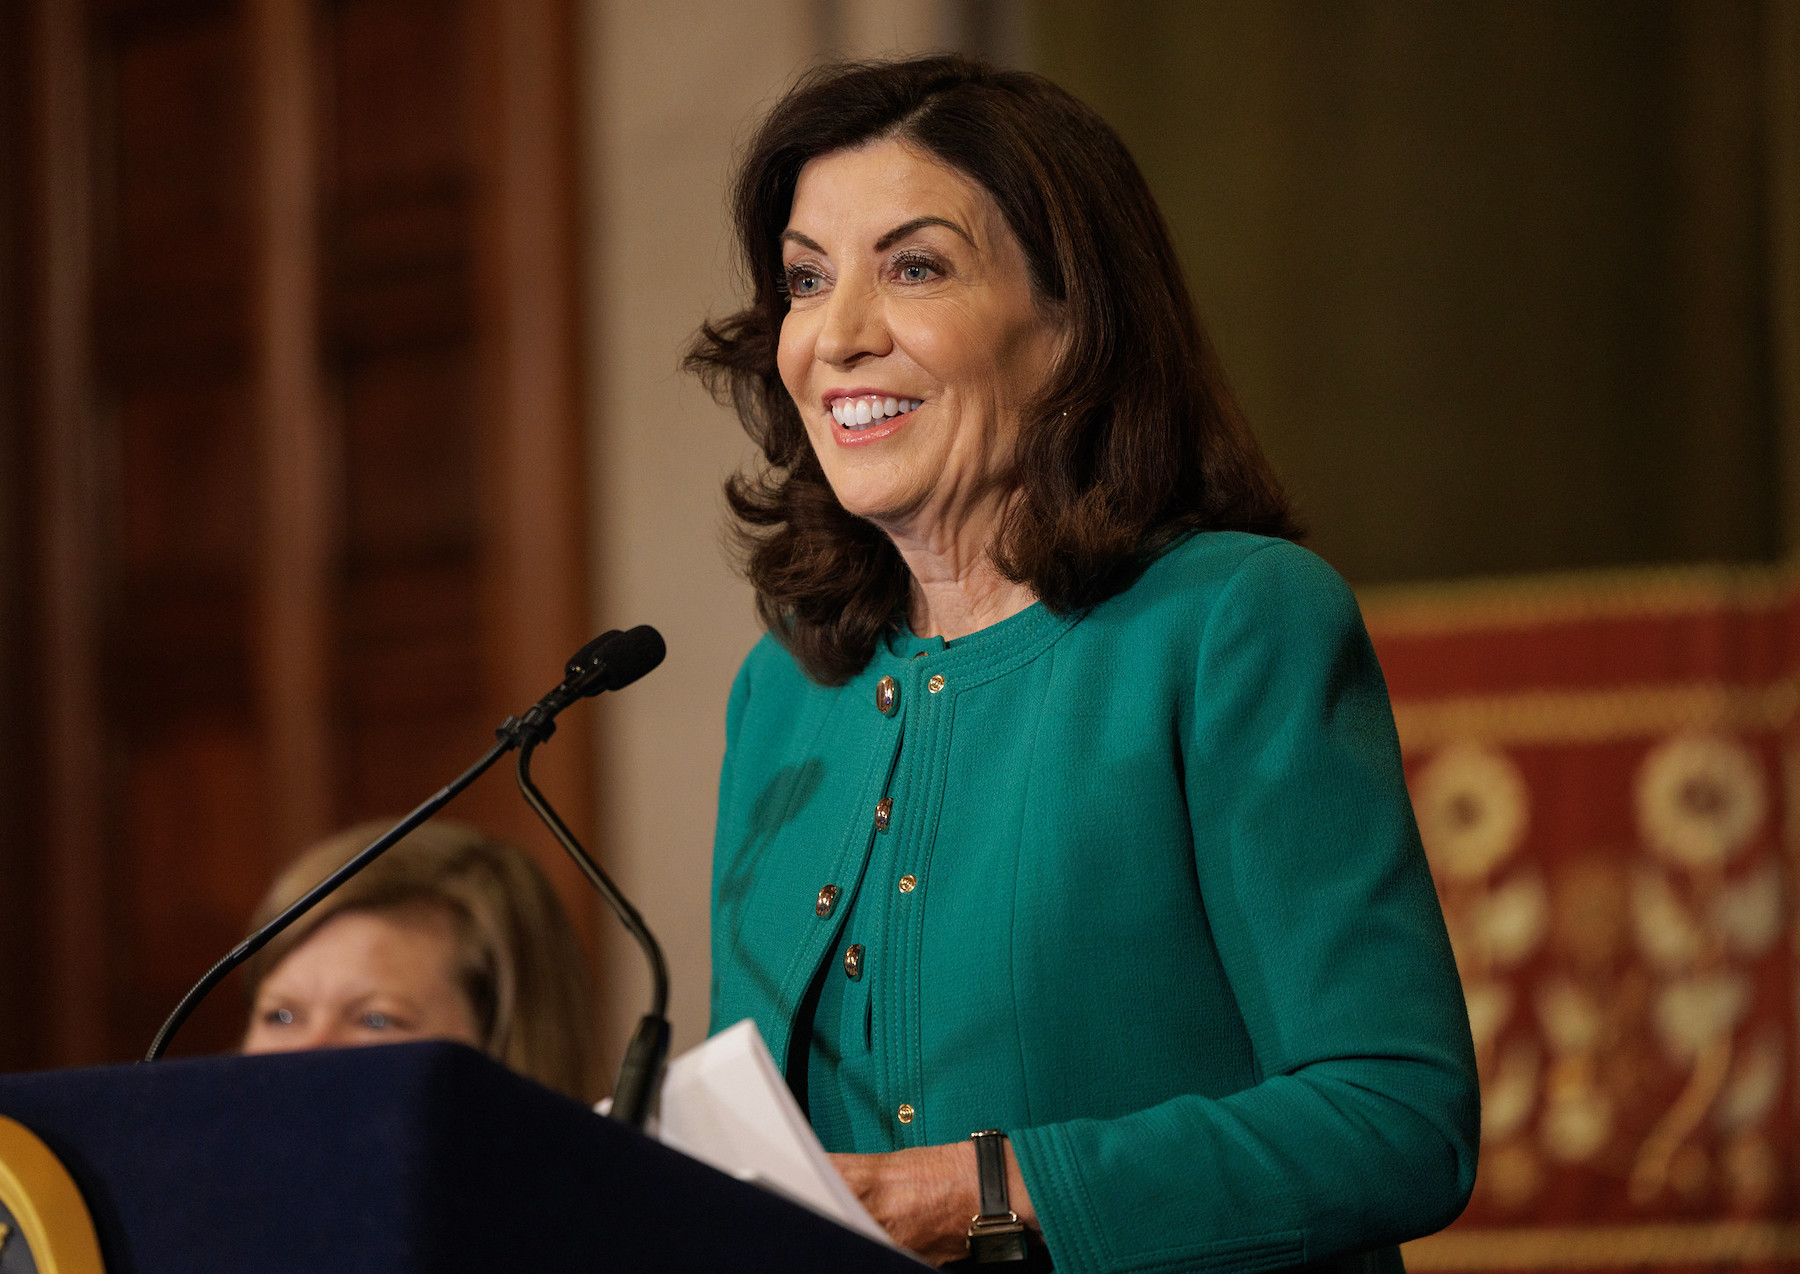 Governor Kathy Hochul smiles at a podium and sports a green jacket at a press conference.